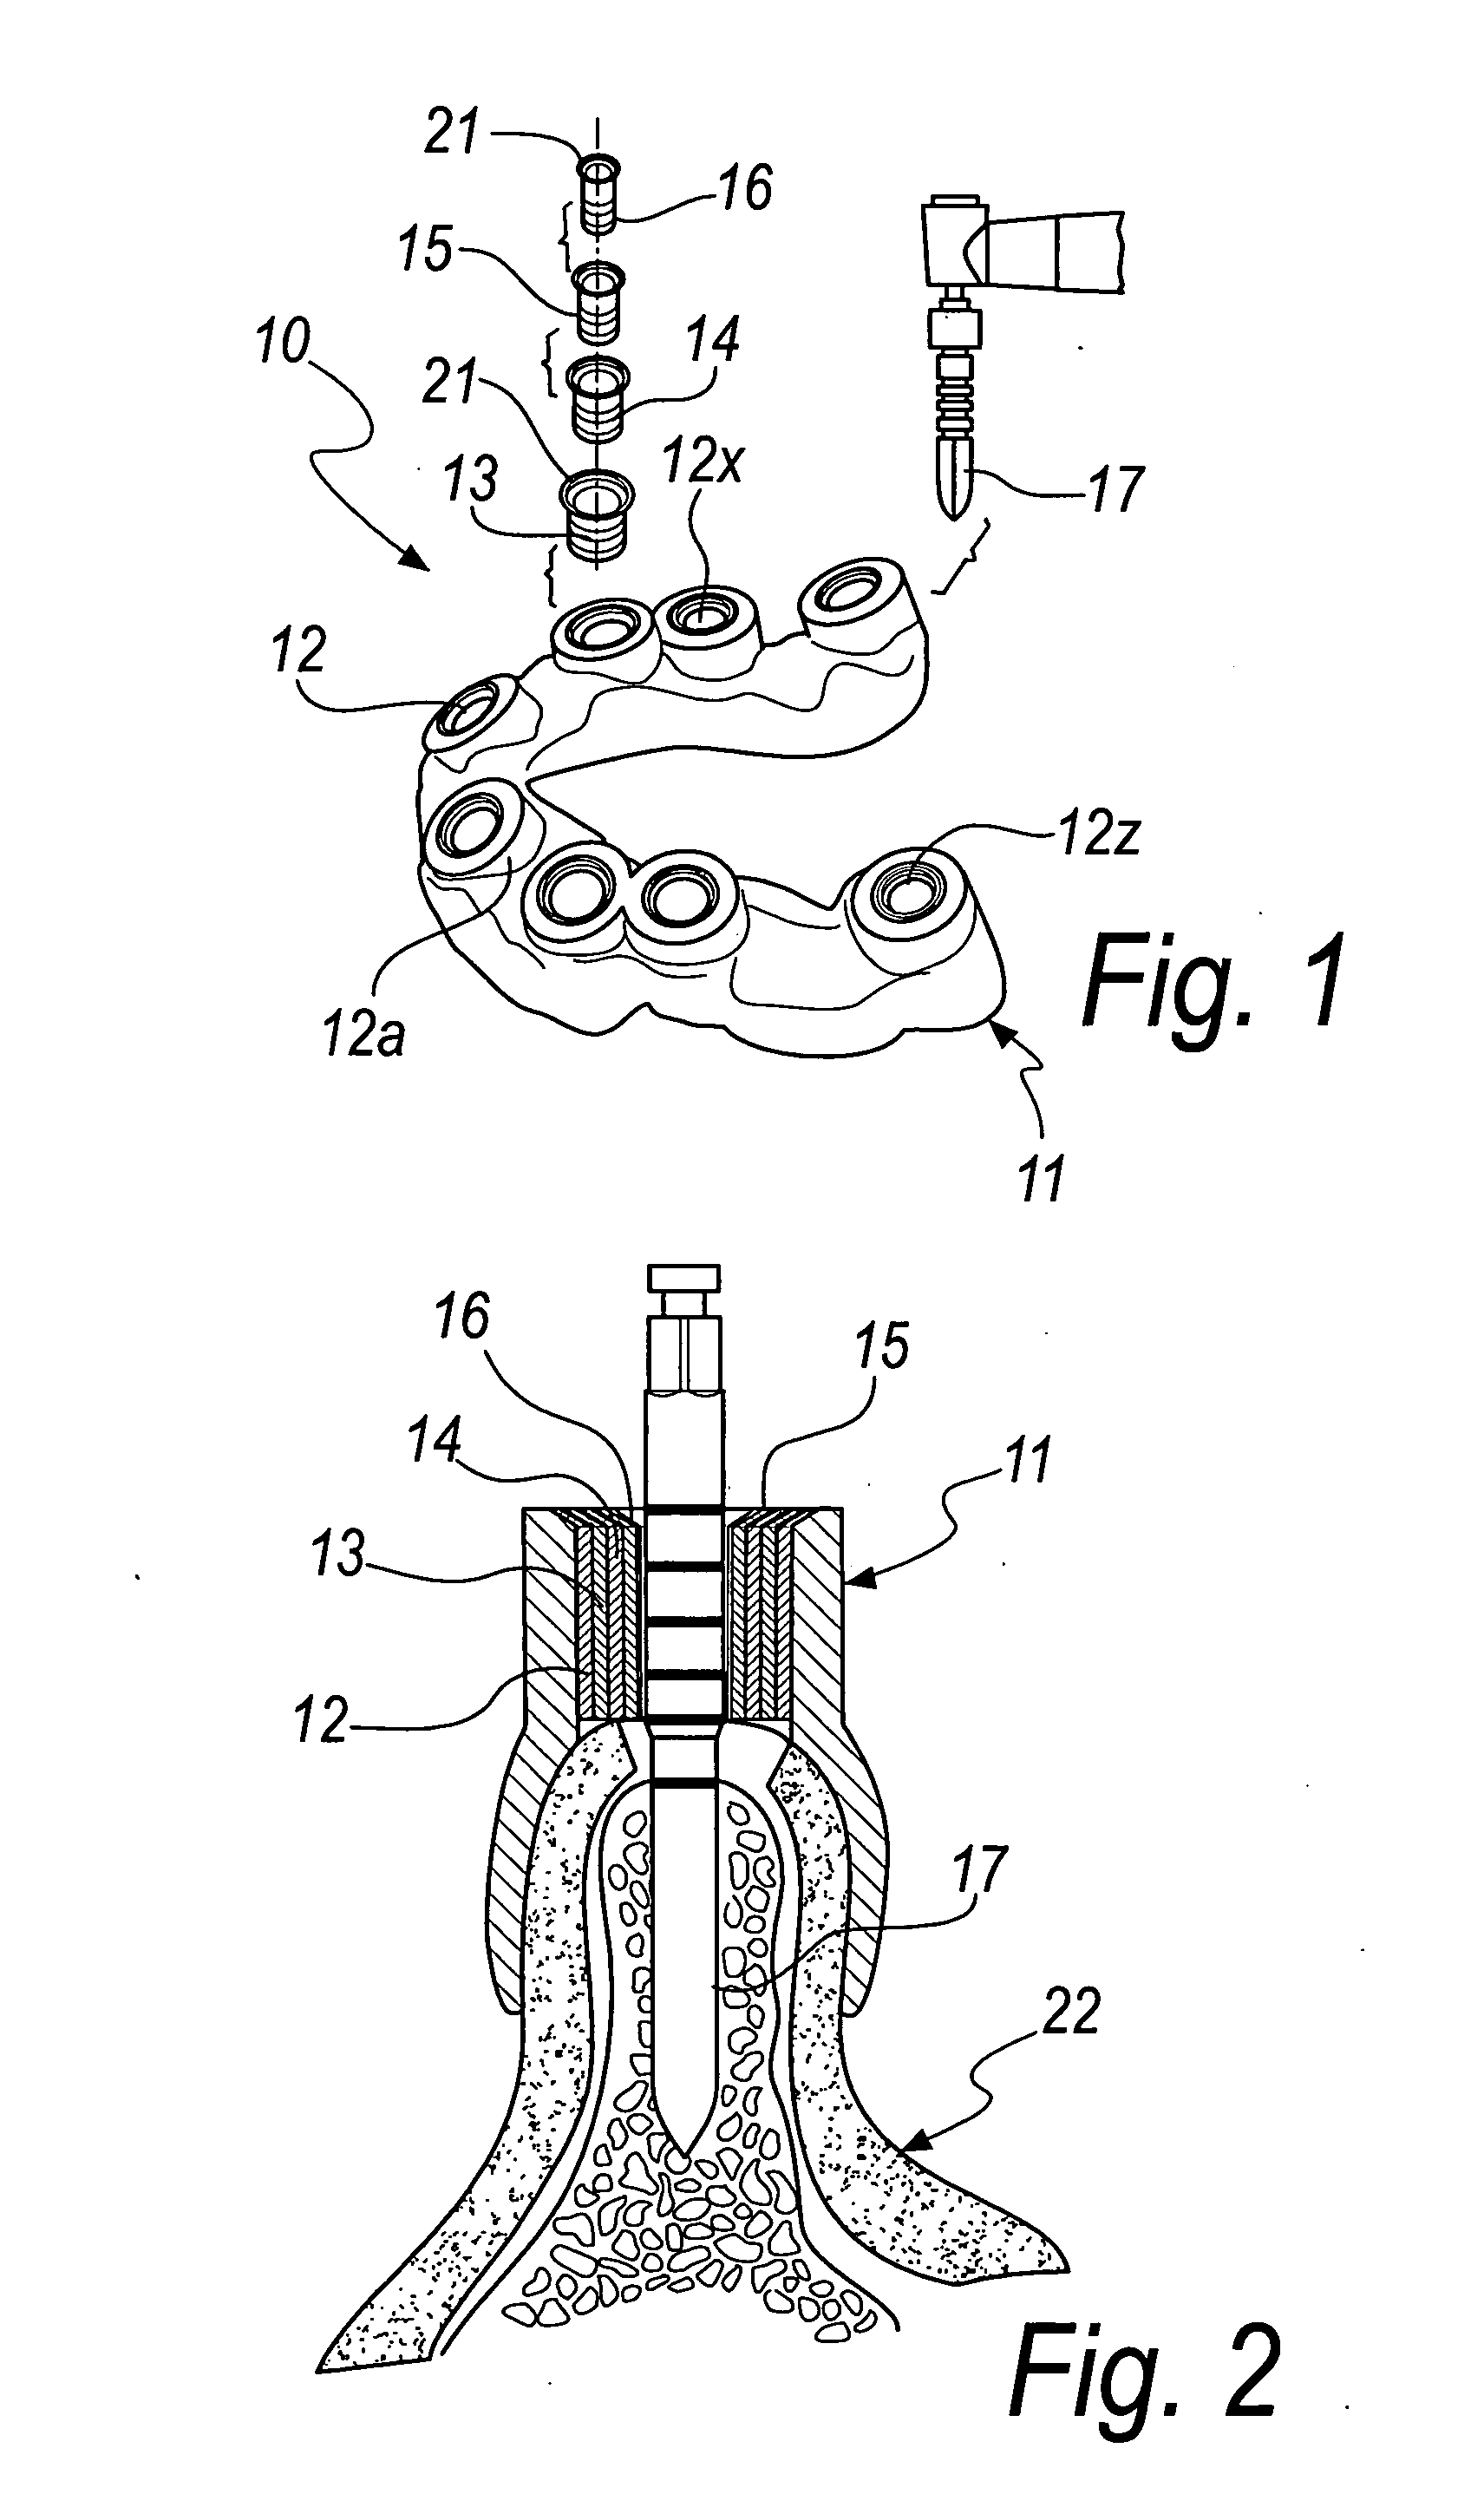 Apparatus for providing implantation sites to be provided in dental surgery, and a method to be performed with such apparatus